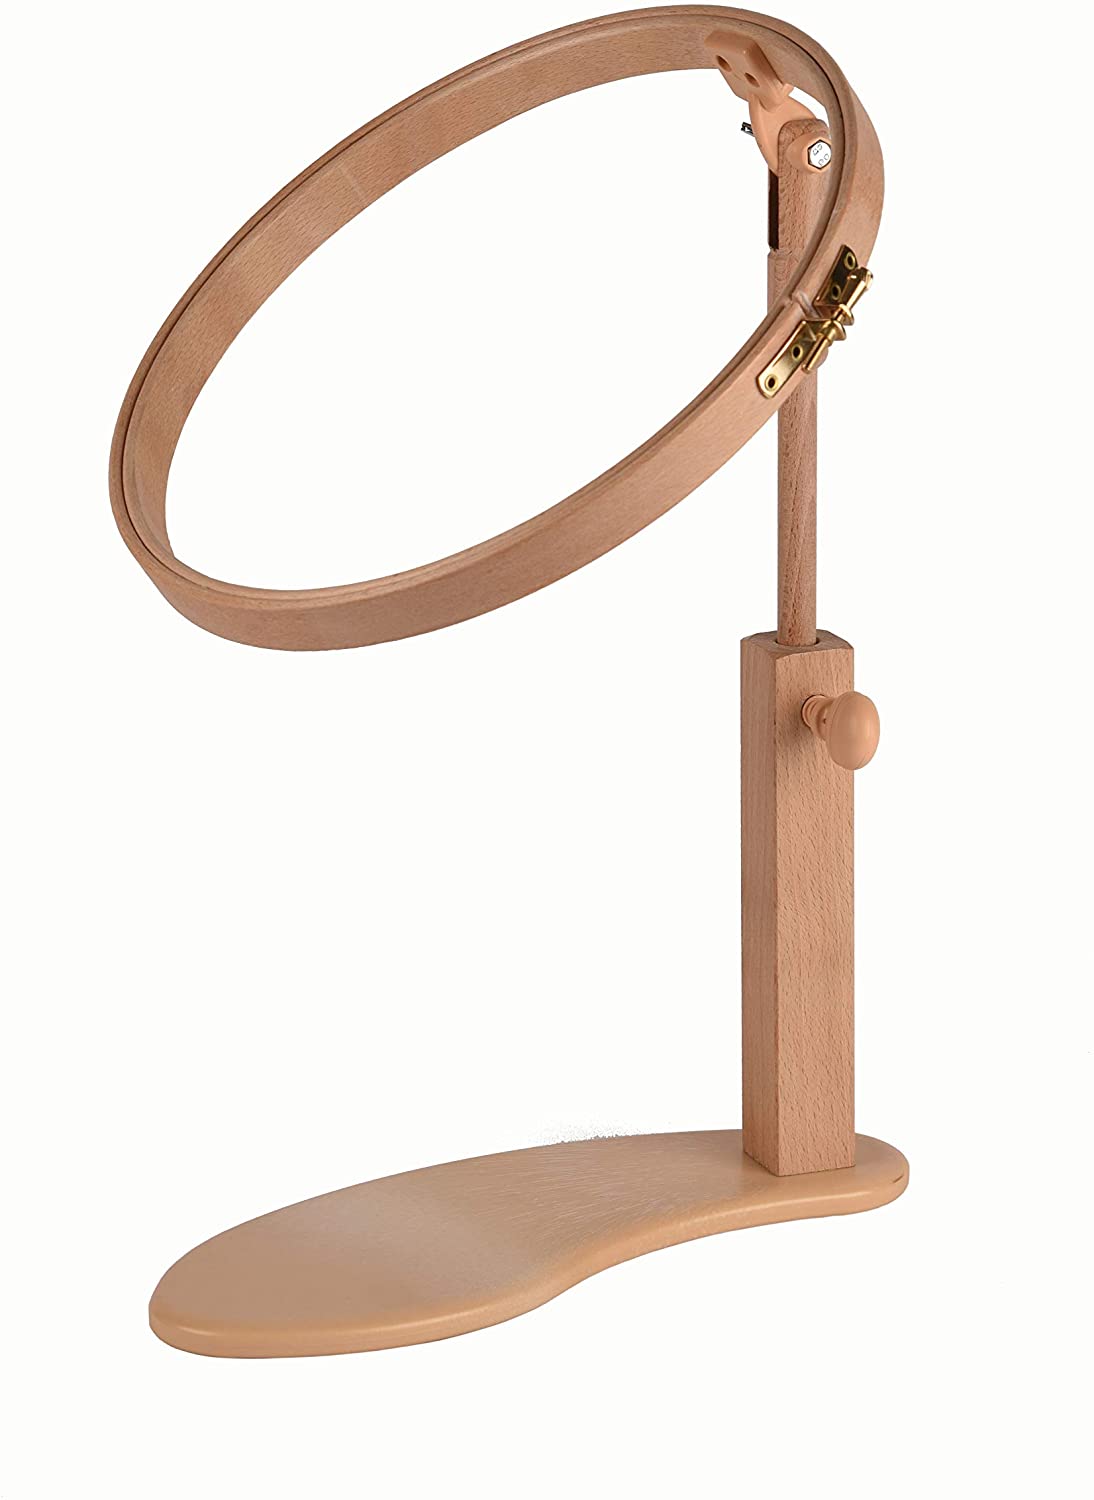 SEAT6E Seat Frame wooden effect base  with 15cm  - 6" x  1" hoop by Elbesee 